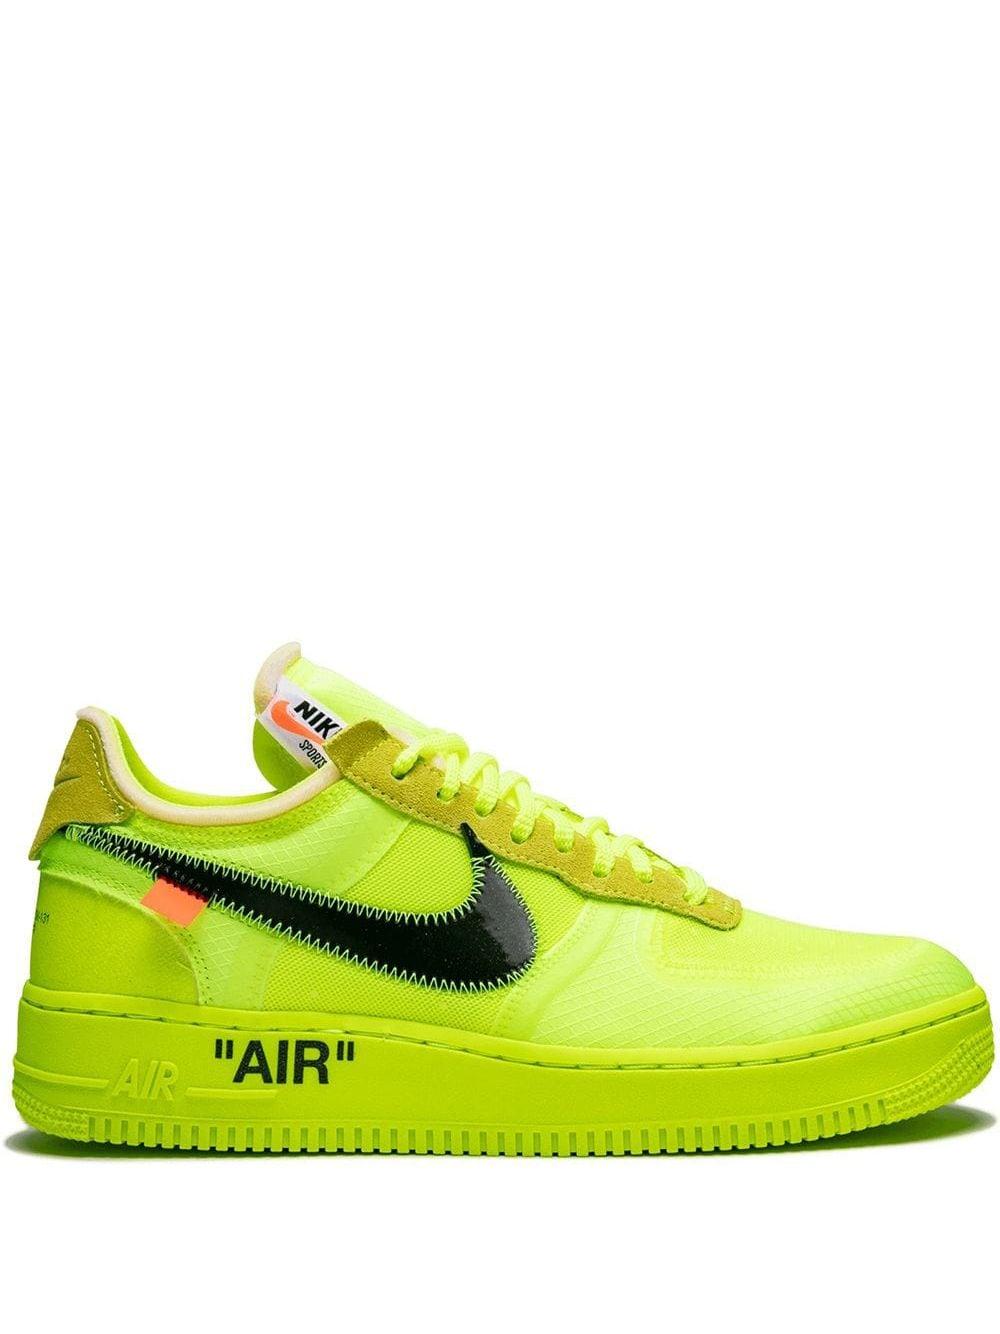 NIKE X OFF-WHITE The 10: Air Force 1 Low 'off-white Volt' Shoes in Green  (Yellow) for Men - Save 71% | Lyst